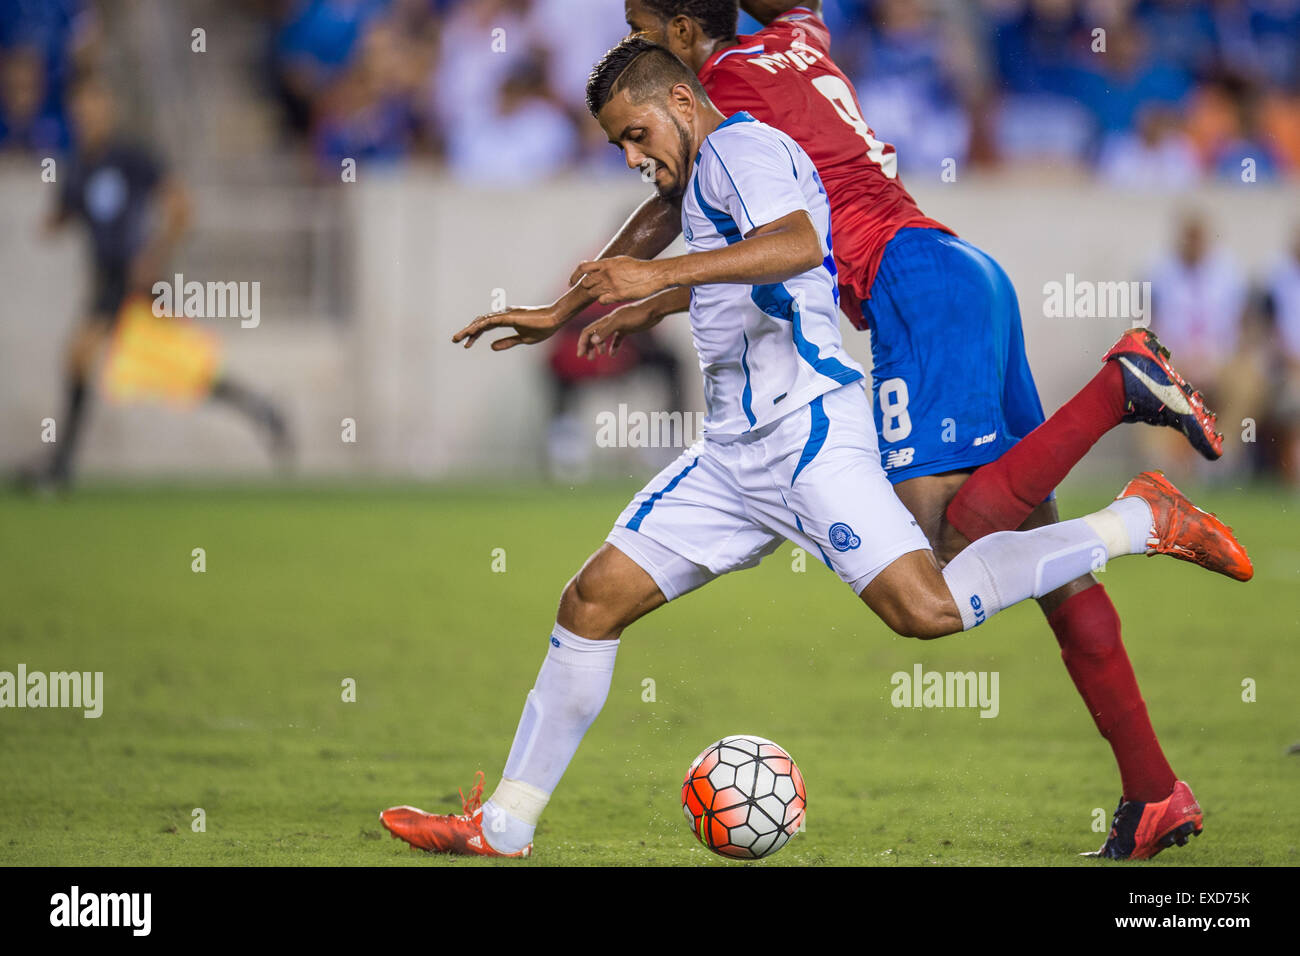 Houston, Texas, USA. 11th July, 2015. El Salvador forward Irvin Herrera (19) takes a shot while being defended by Costa Rica defender Dave Myrie (8) during the 2nd half of an international CONCACAF Gold Cup soccer match between Costa Rica and El Salvador at BBVA Compass Stadium in Houston, TX. The game ended in a 1-1 draw. Credit:  Cal Sport Media/Alamy Live News Stock Photo